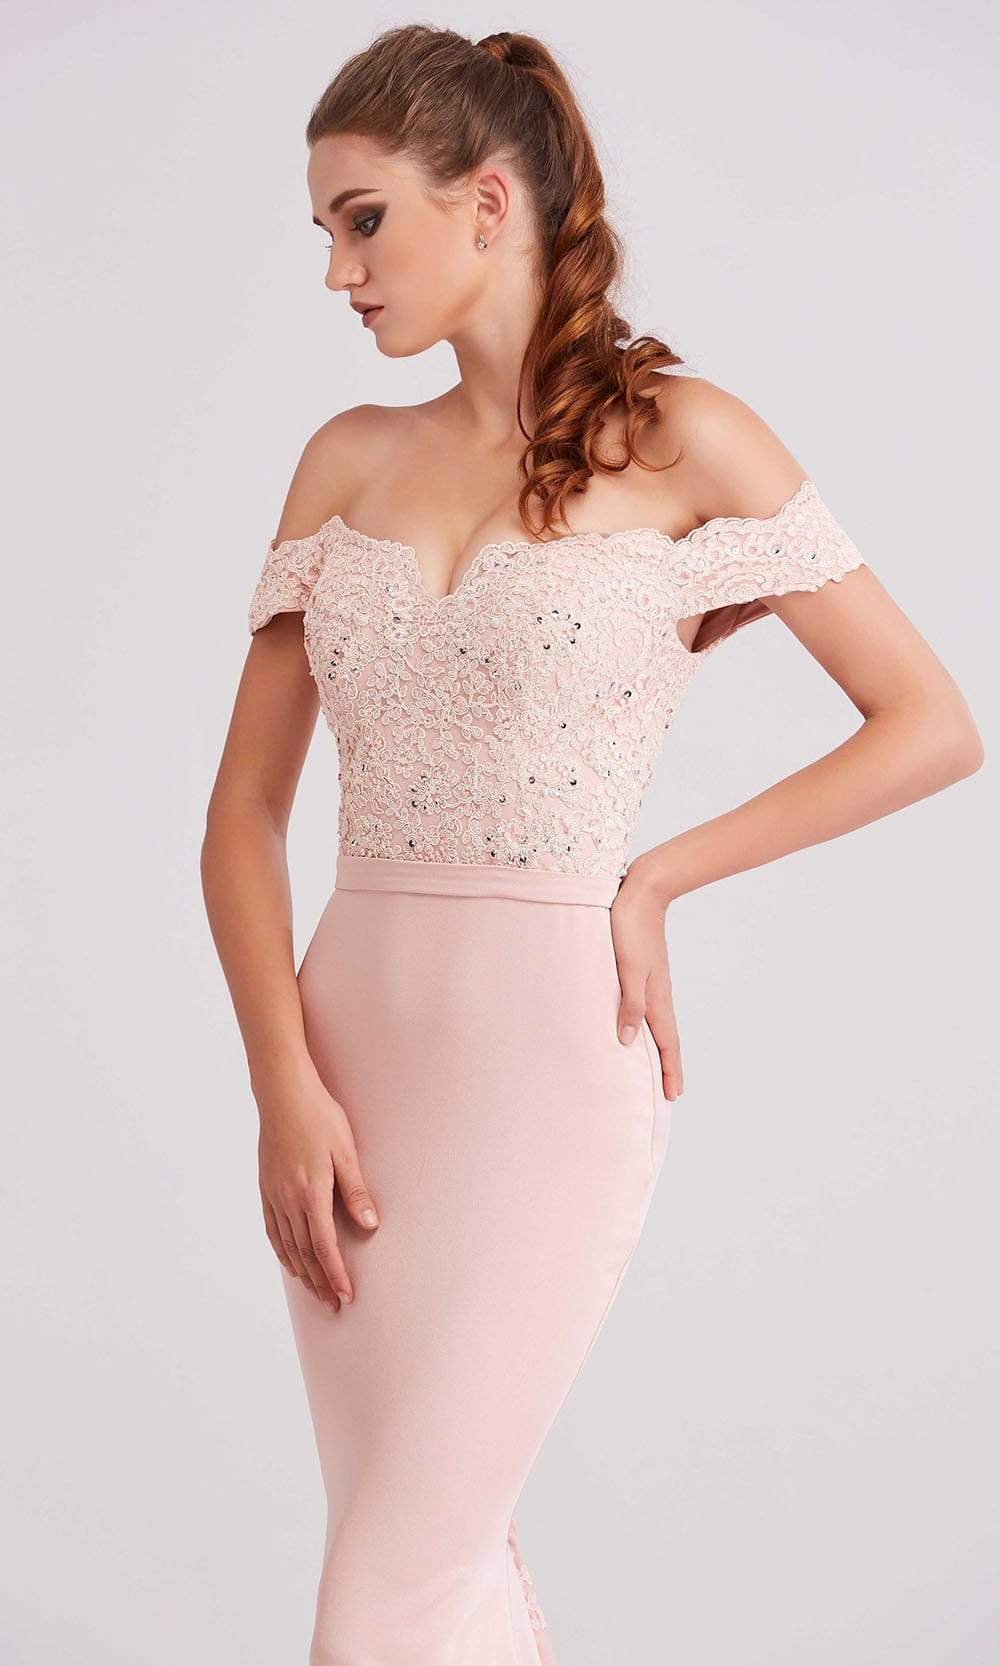 J'Adore - J15016 Off Shoulder Beaded Lace Bodice Mermaid Dress Special Occasion Dress